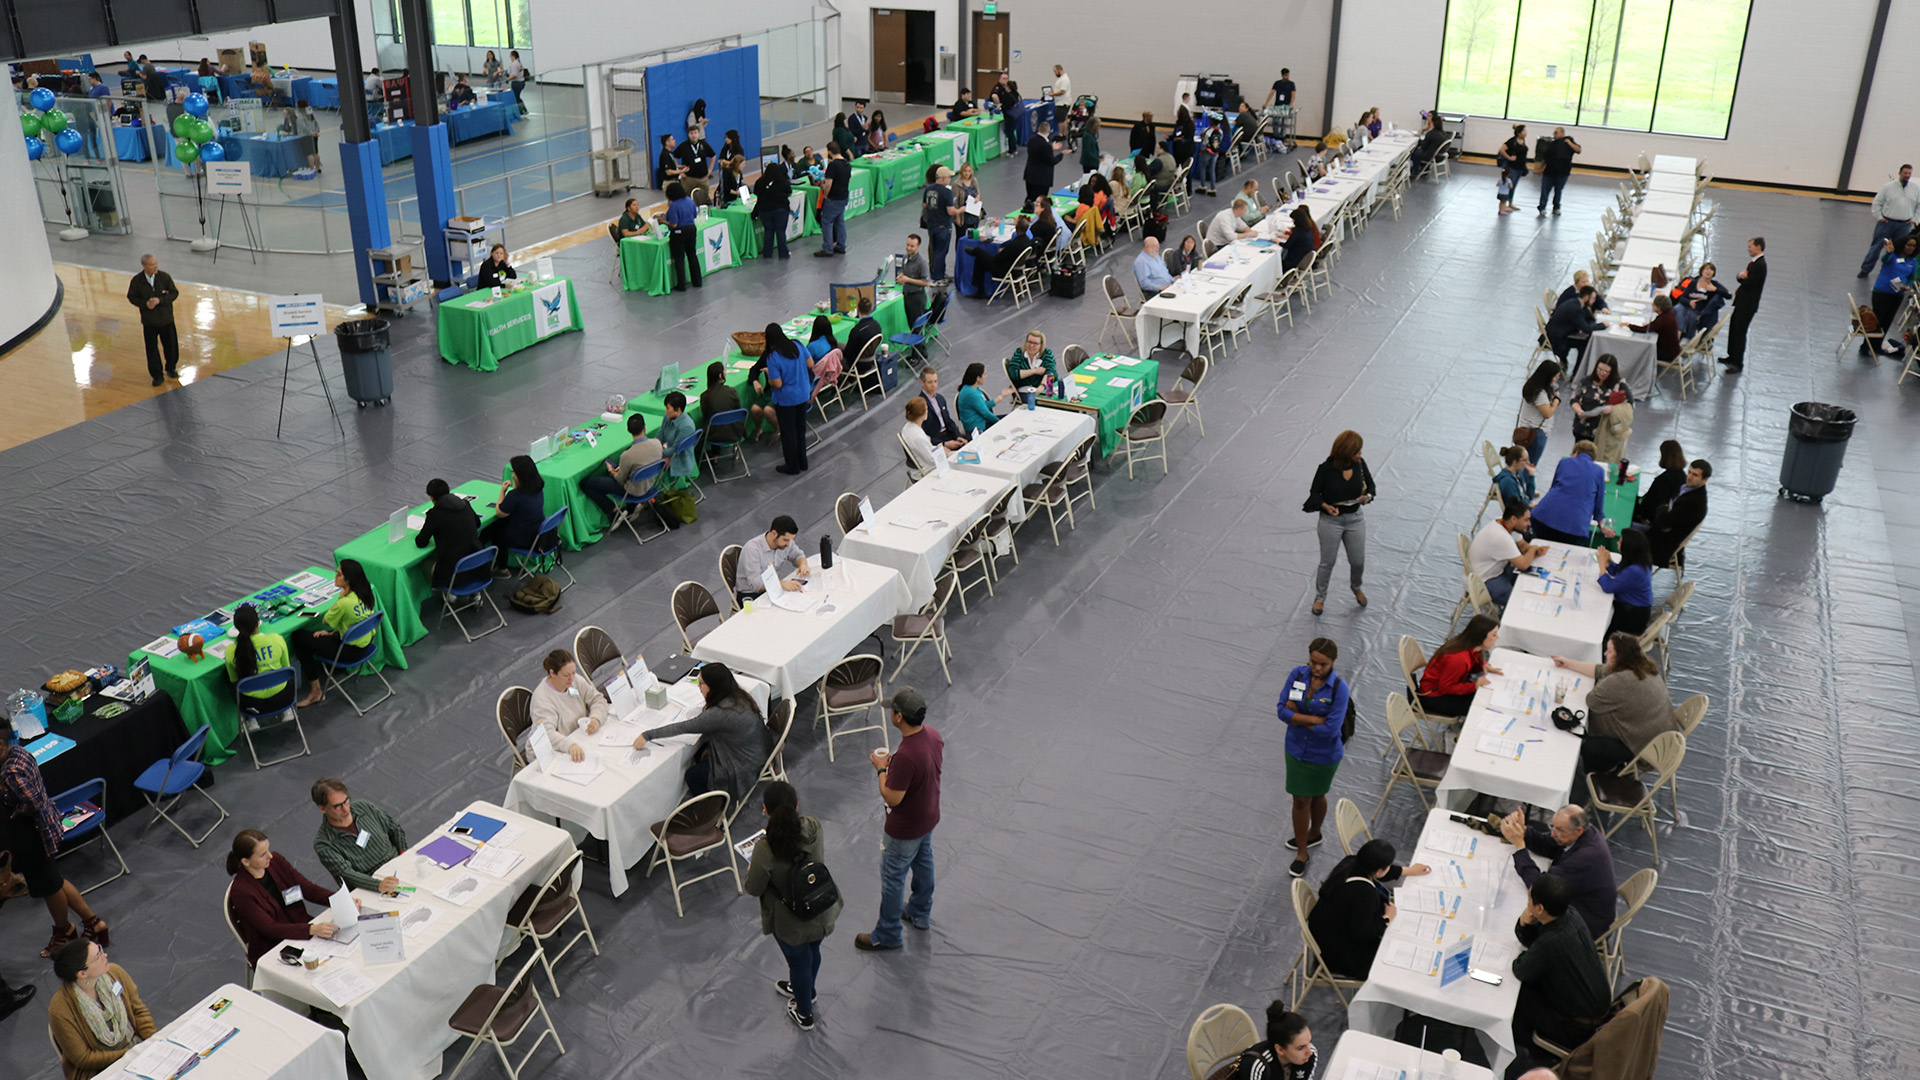 Rows of busy tables at an event in the Multi-Activity Court, or MAC Gym.